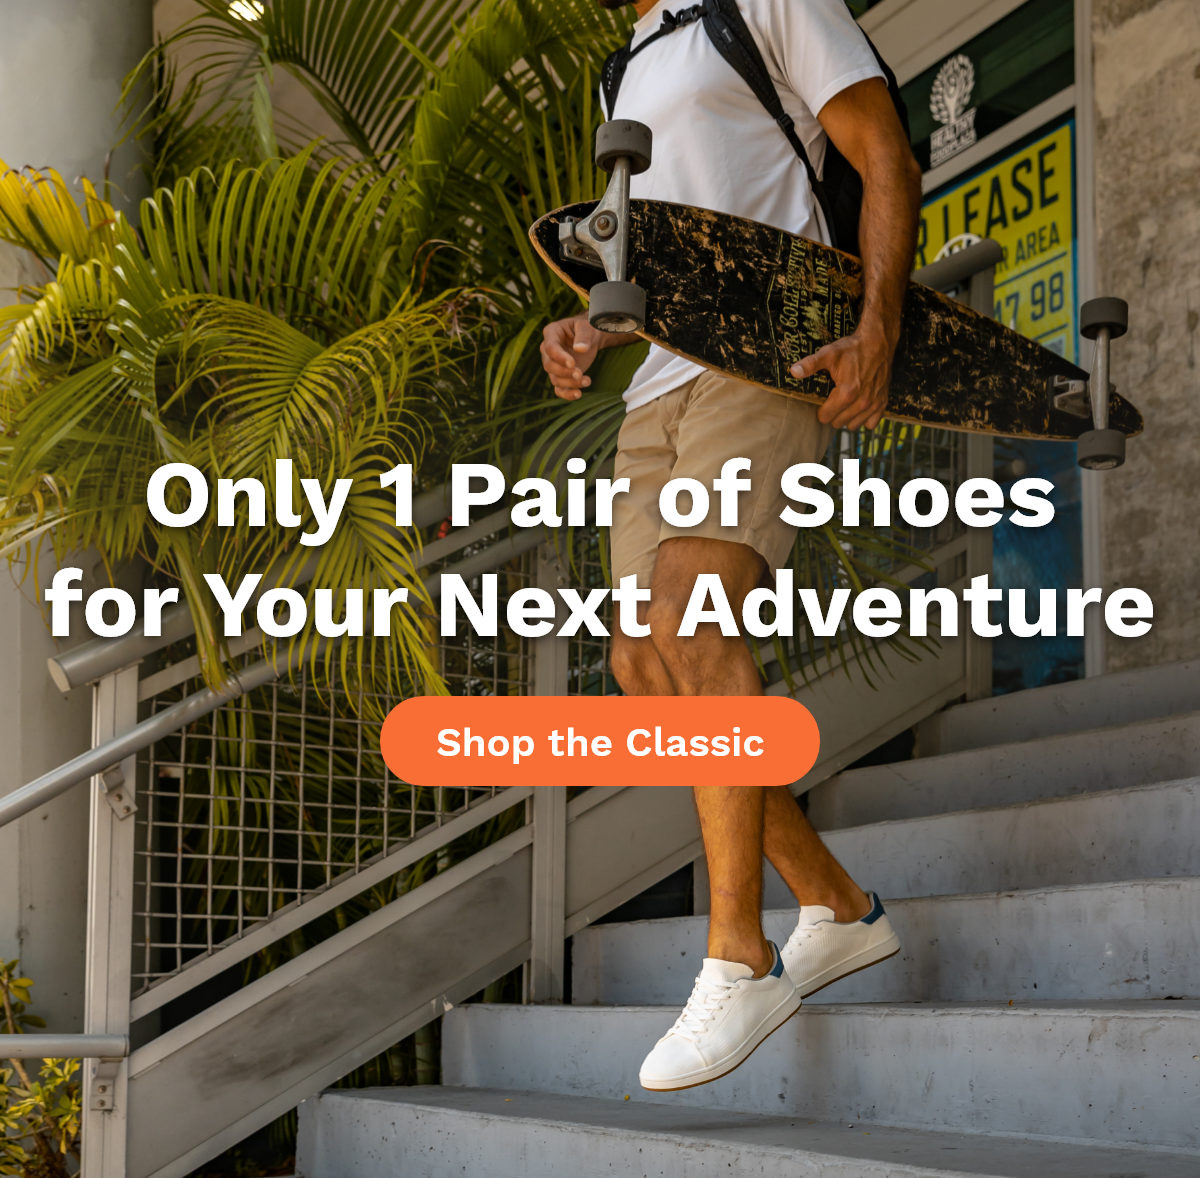 Only 1 pair of shoes for your next adventure [Shop the Classic]